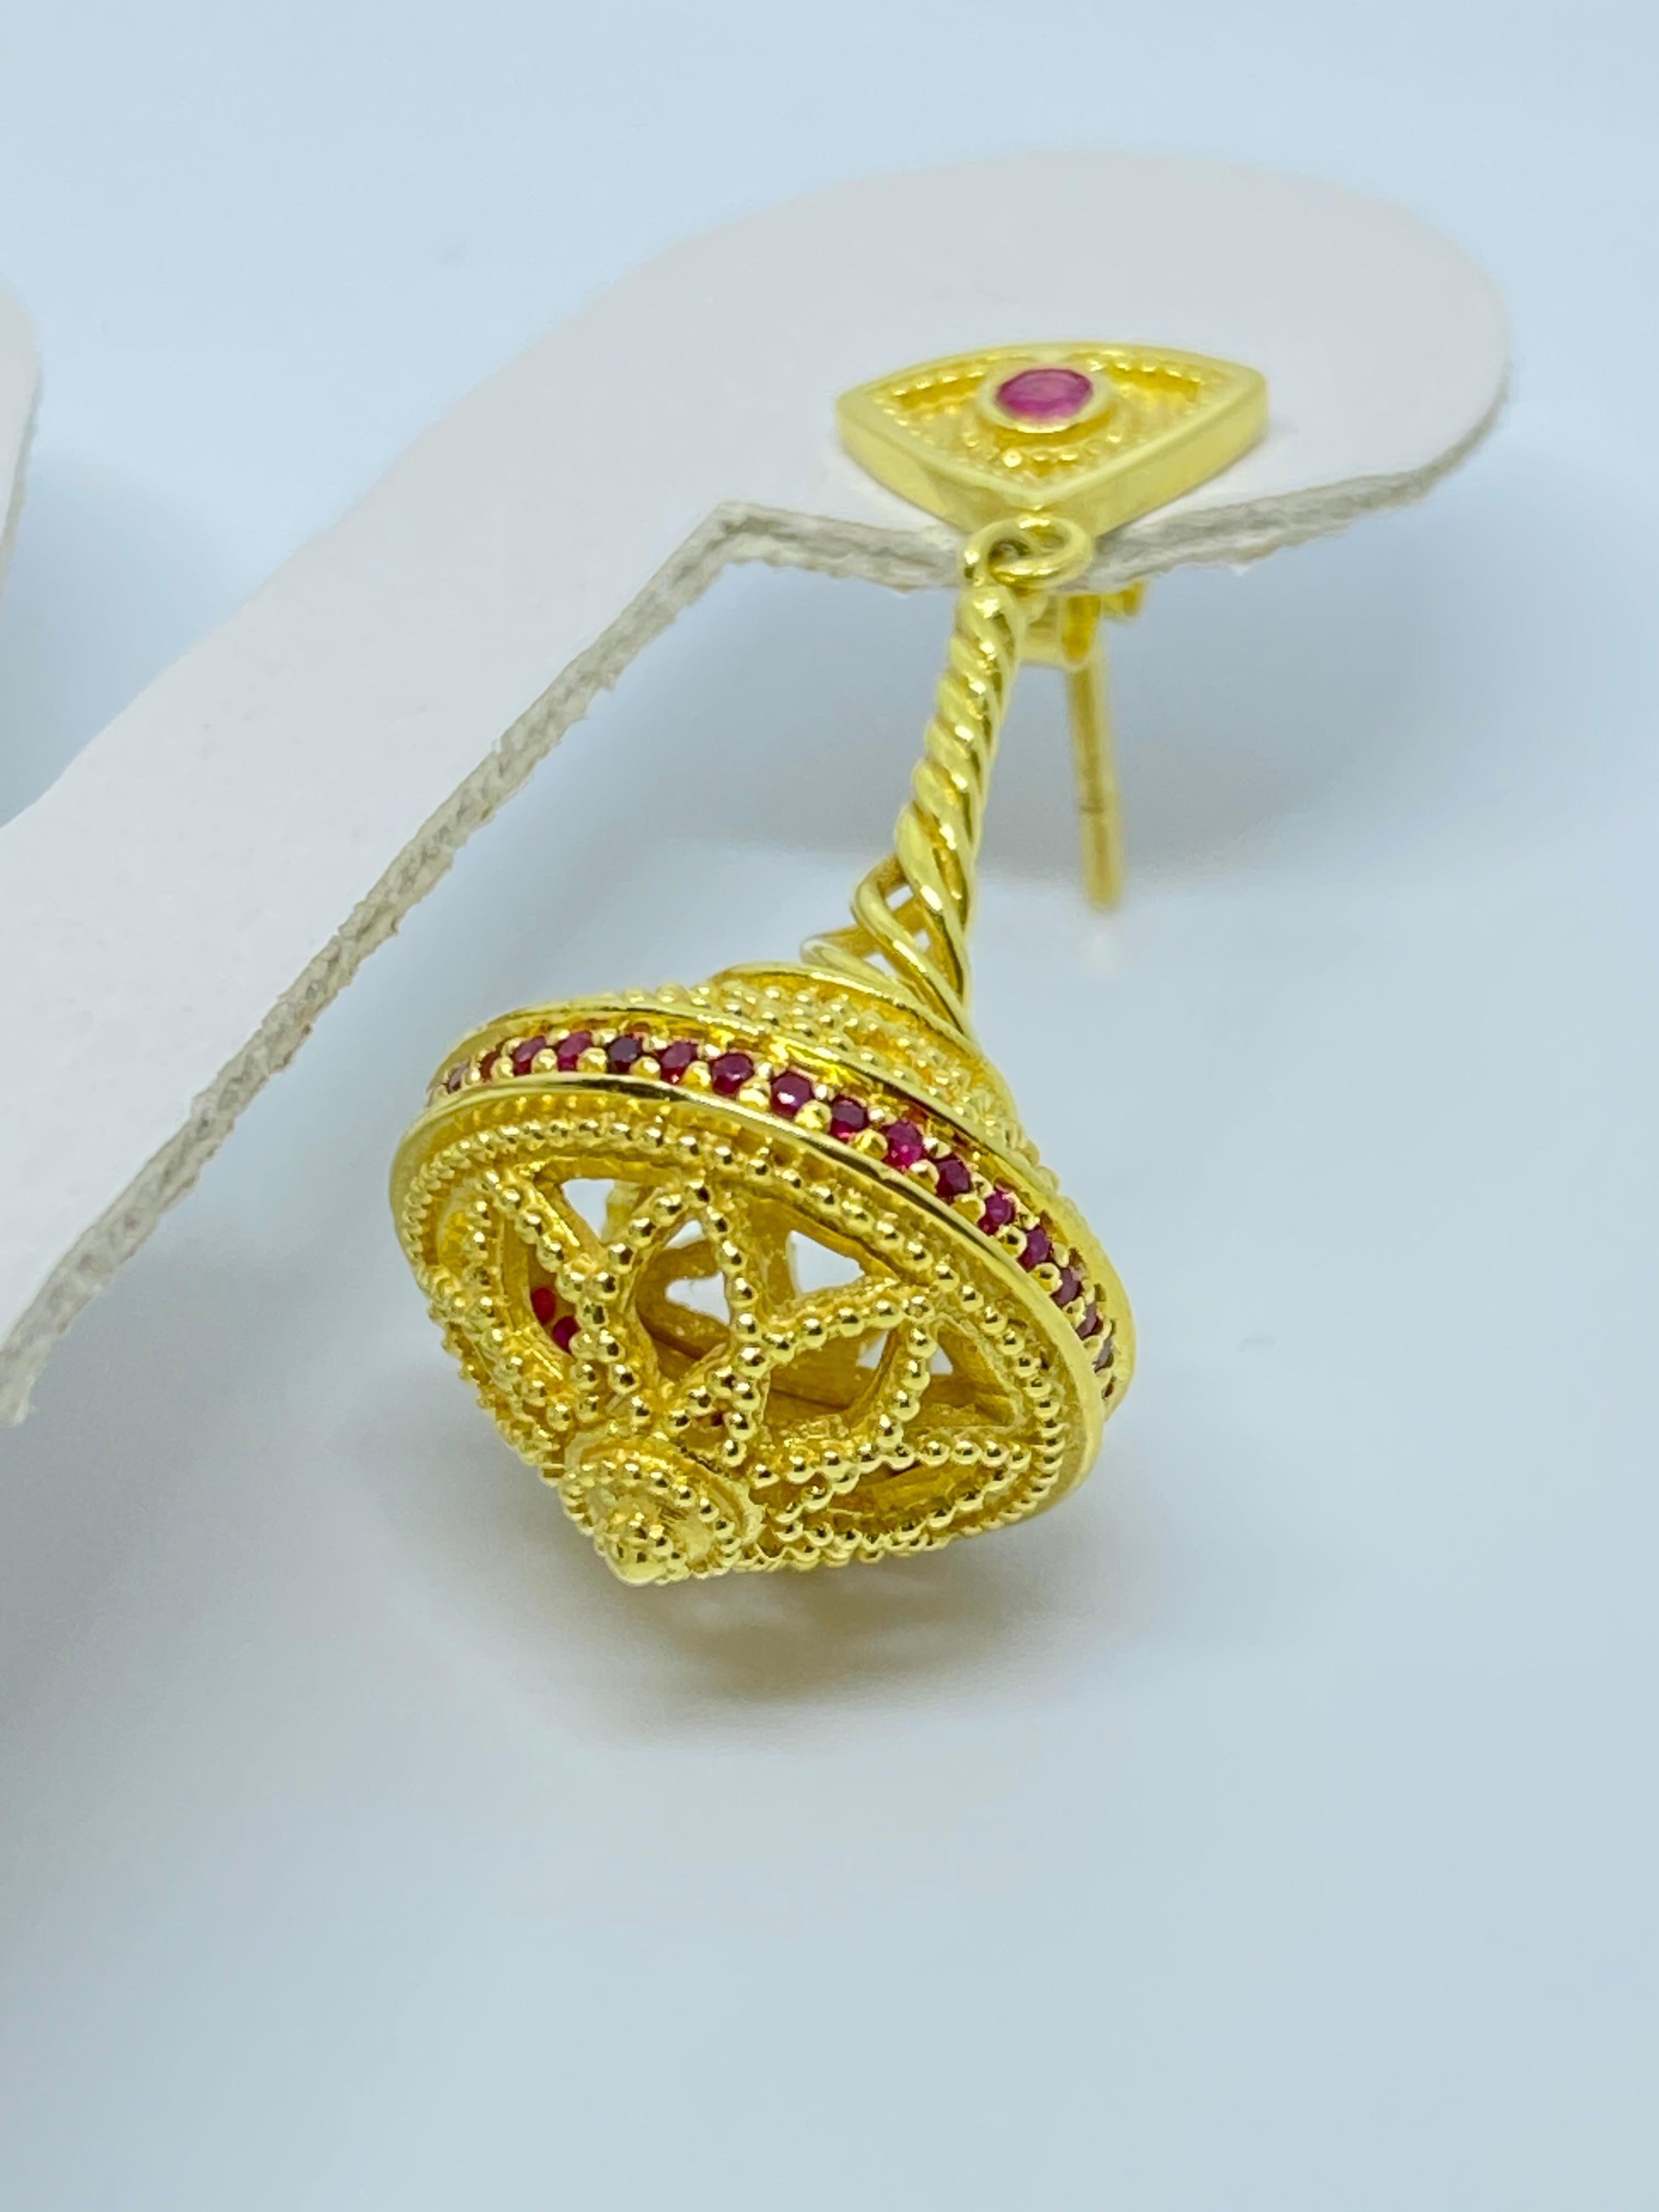 These S.Georgios designer earrings are hand made from 18 Karat Yellow Gold and decorated with Byzantine-era style granulation workmanship. This beautiful and elegant pair feature 2 rows of microscopically set Rubies total weight of 0.87 Carats,